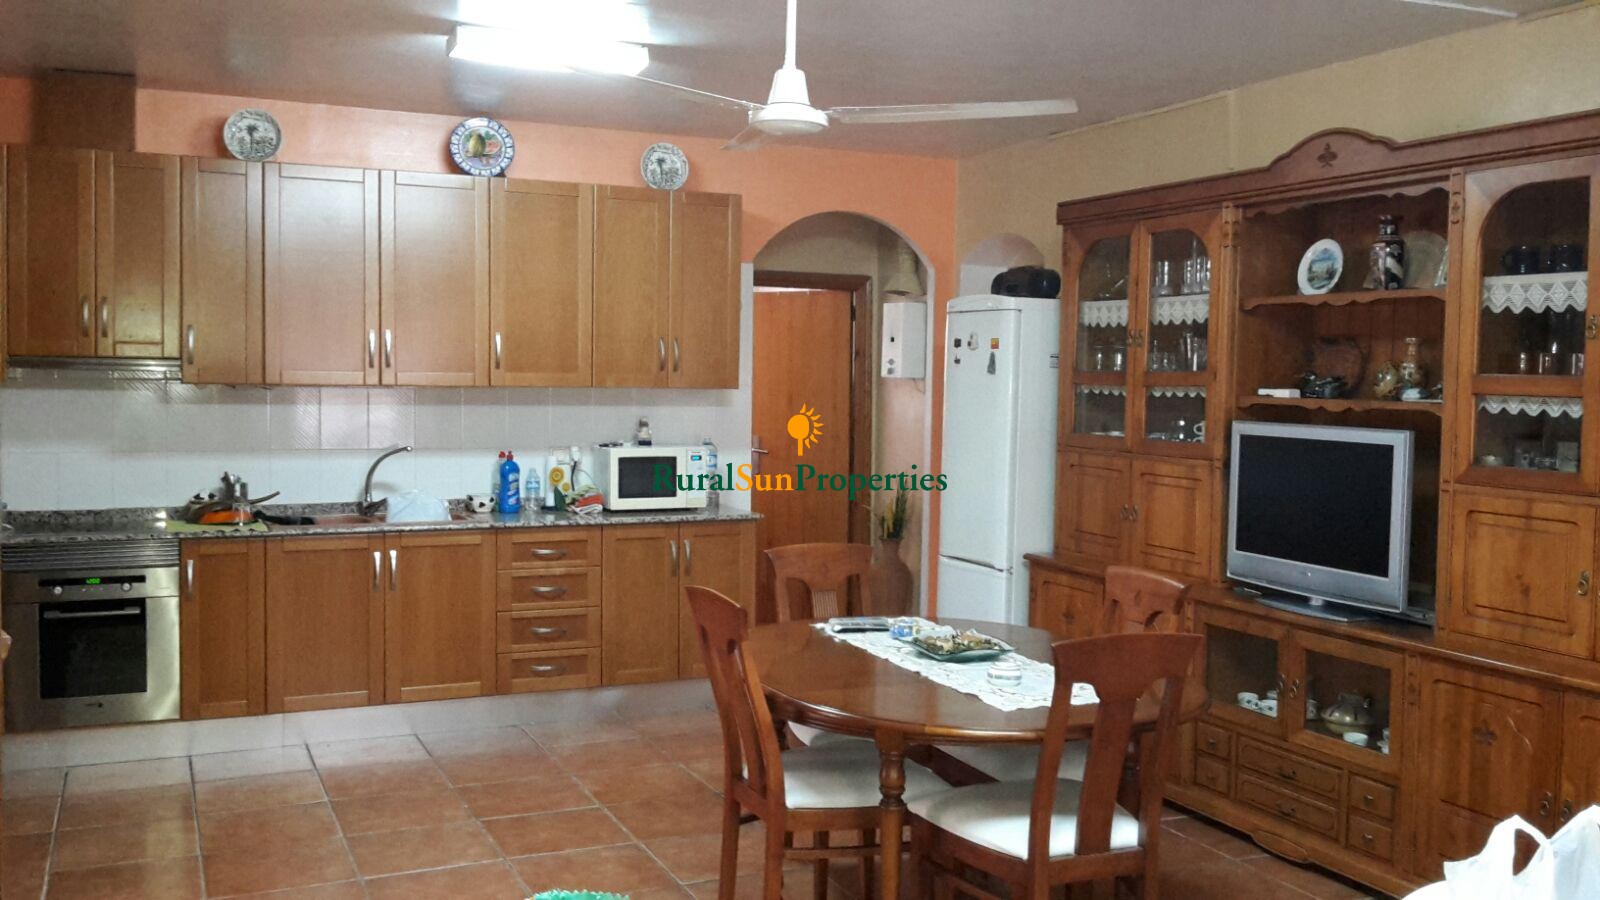 SOLD. Sale country house/finca for sale in Yecla. 10,000 sq.m plot